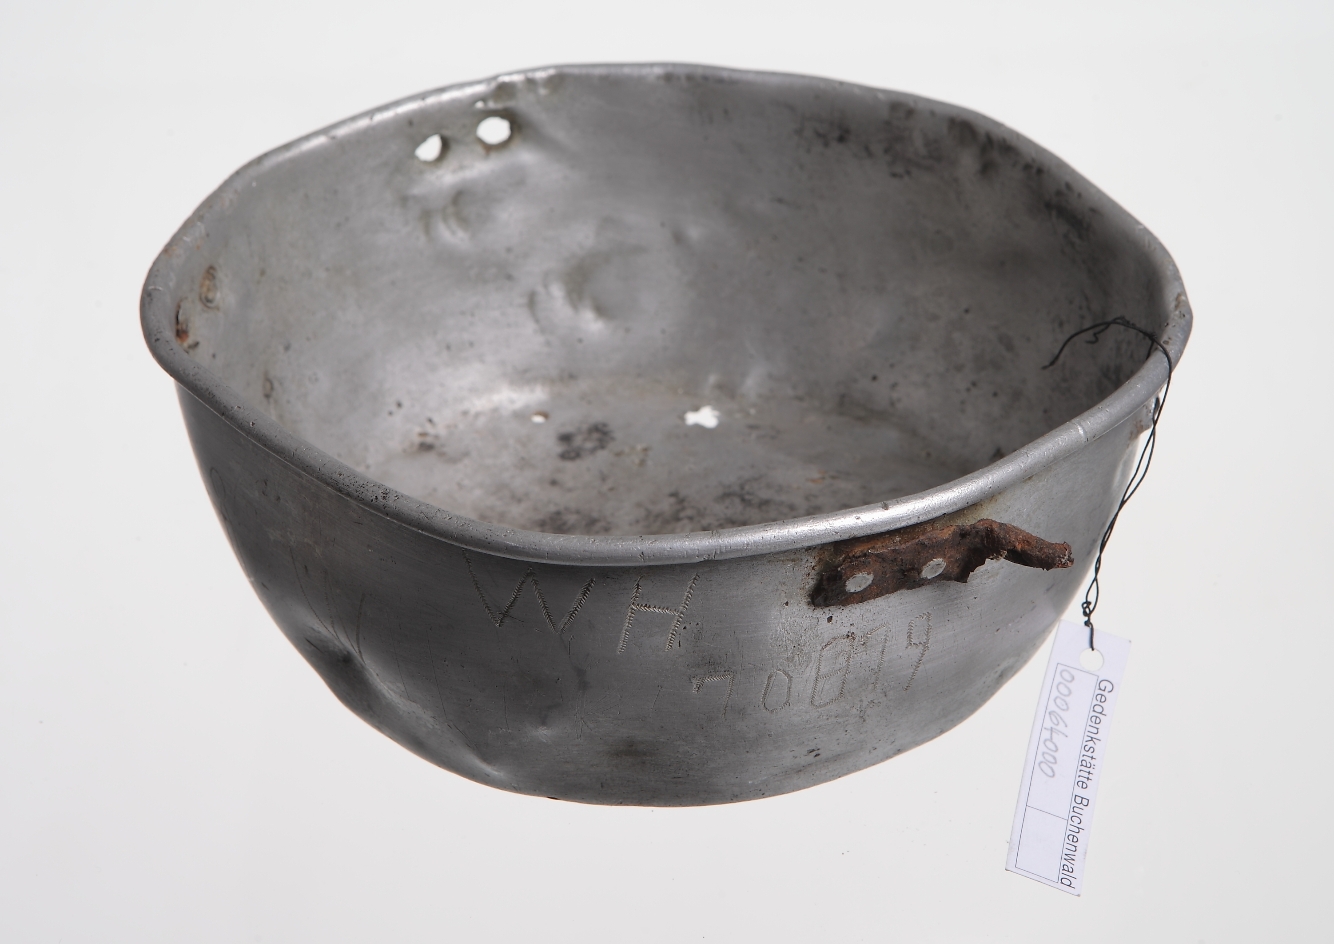 On the picture you can see a metal eating bowl. It is a found object from the educational material found object case.